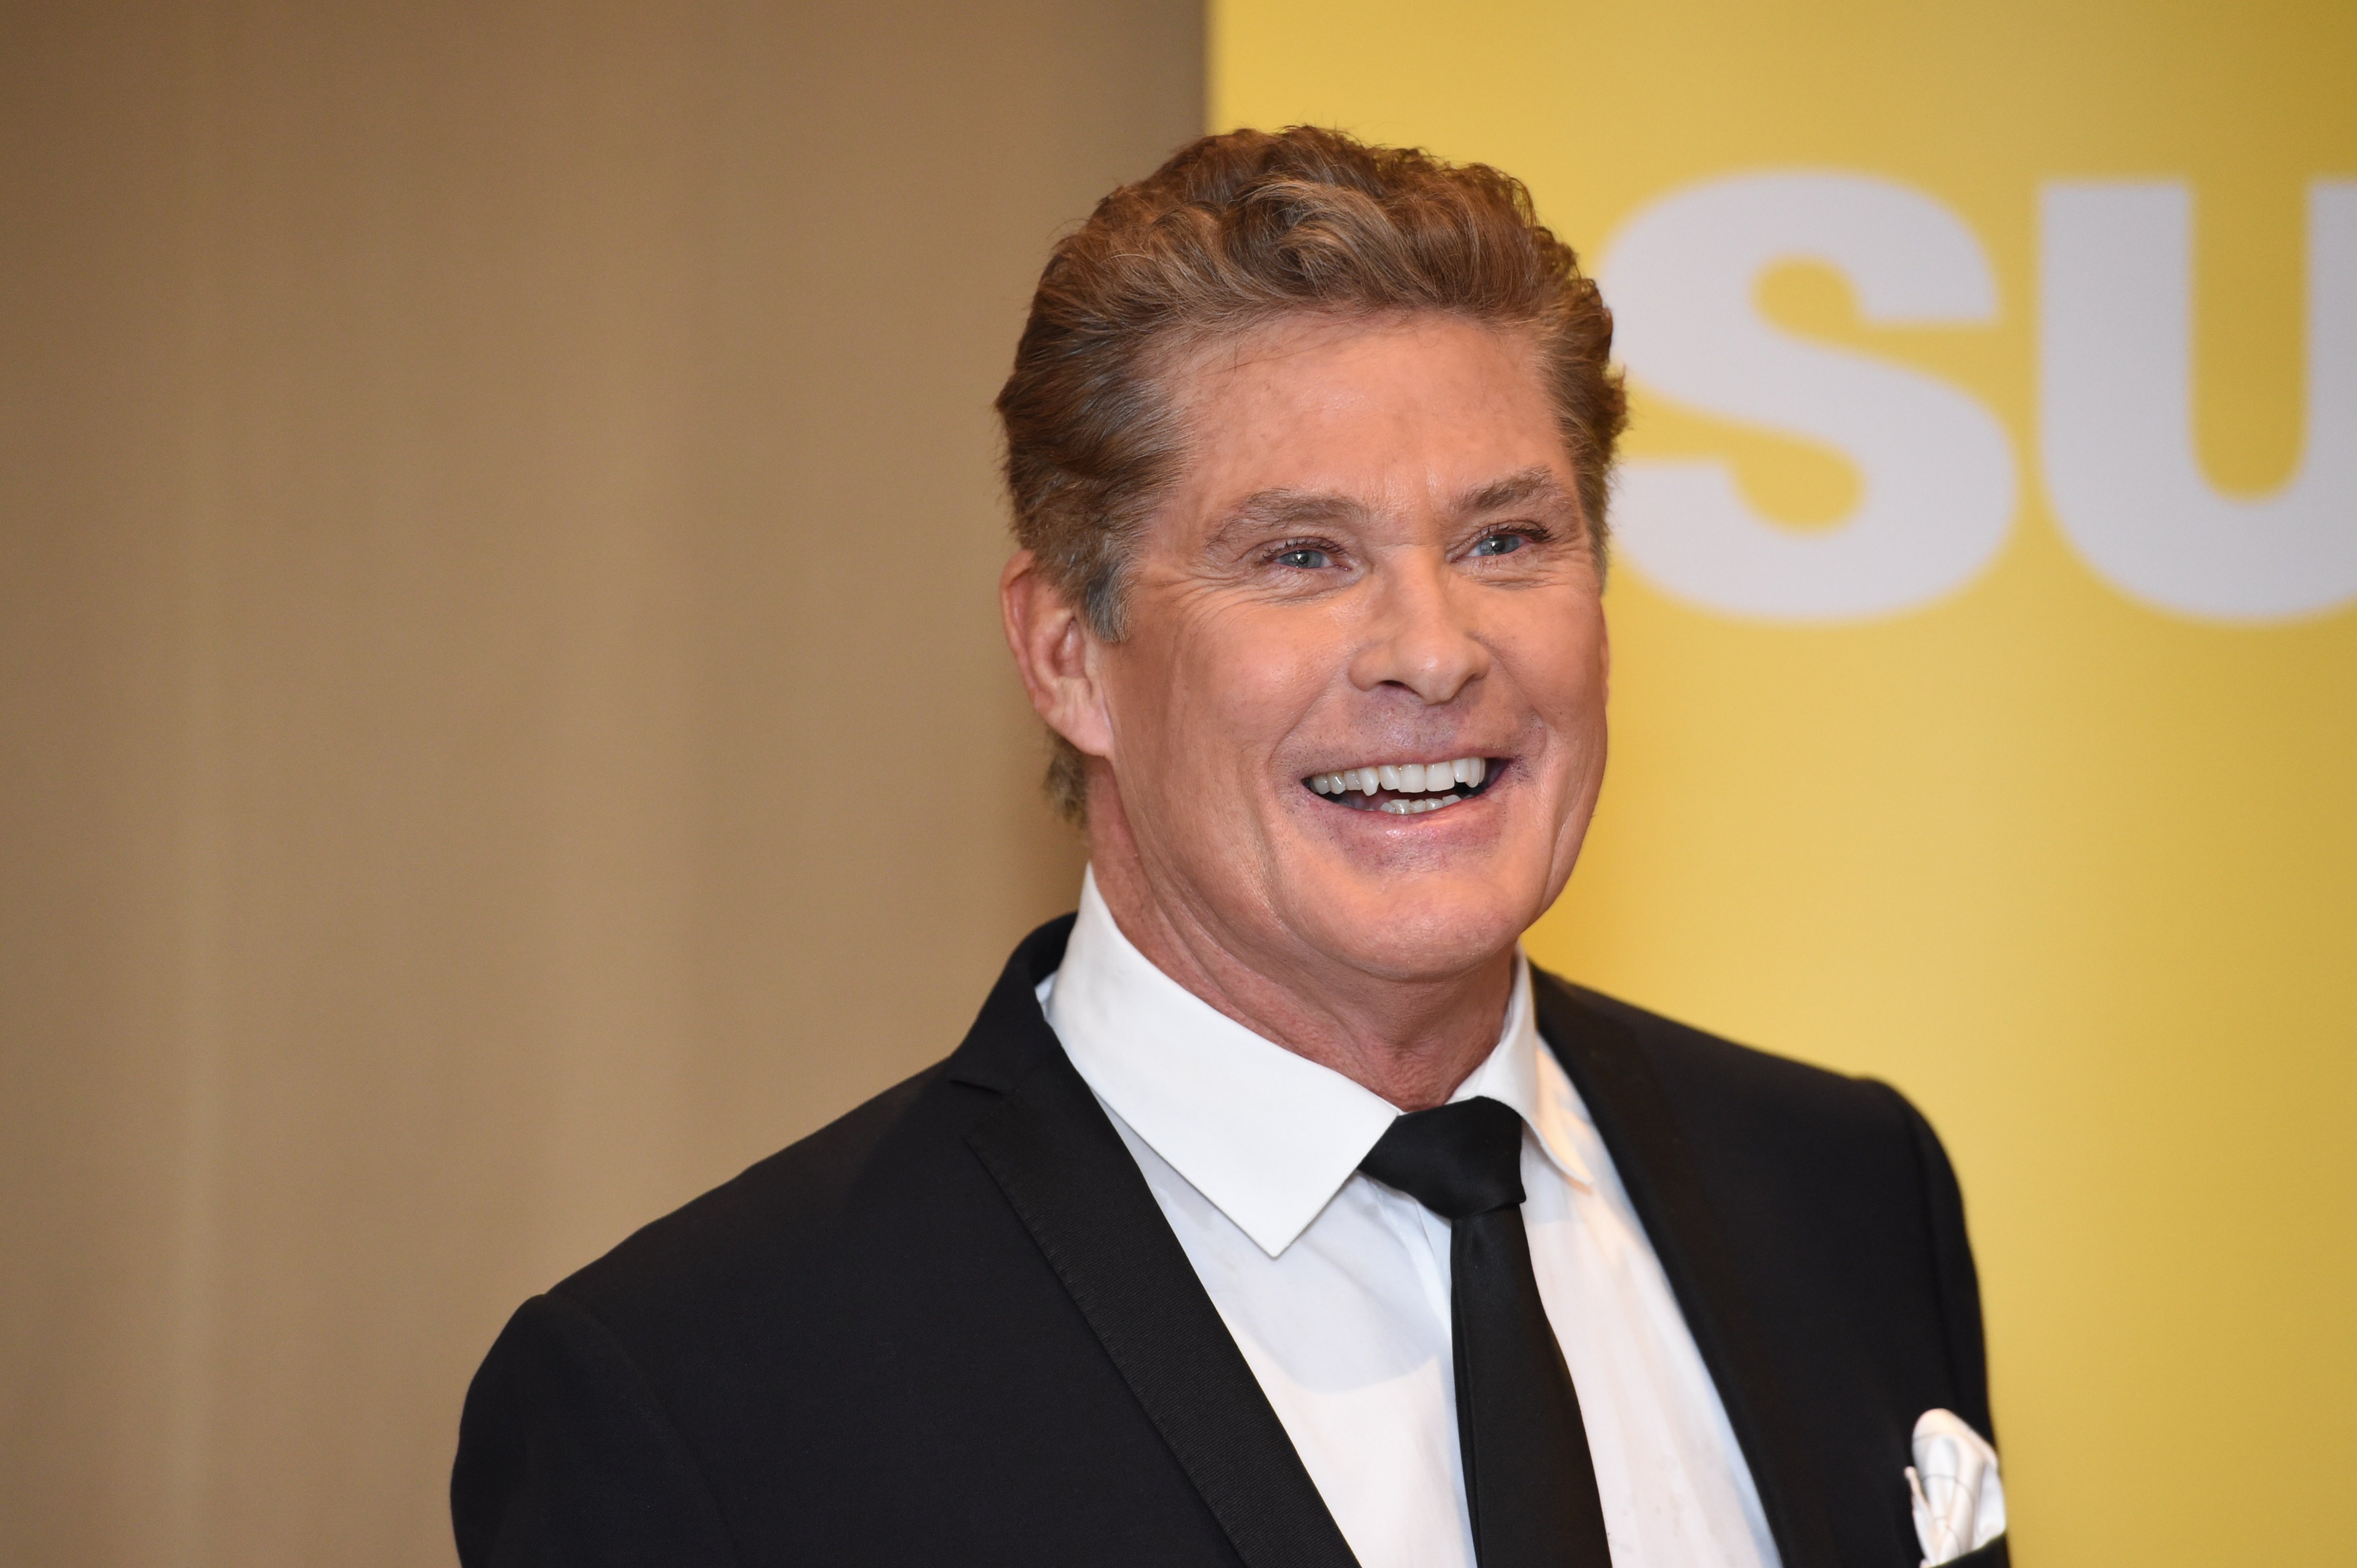 American actor and personality David Hasselhoff during a press conference in Helsinki, Finland on Jan. 16, 2015.